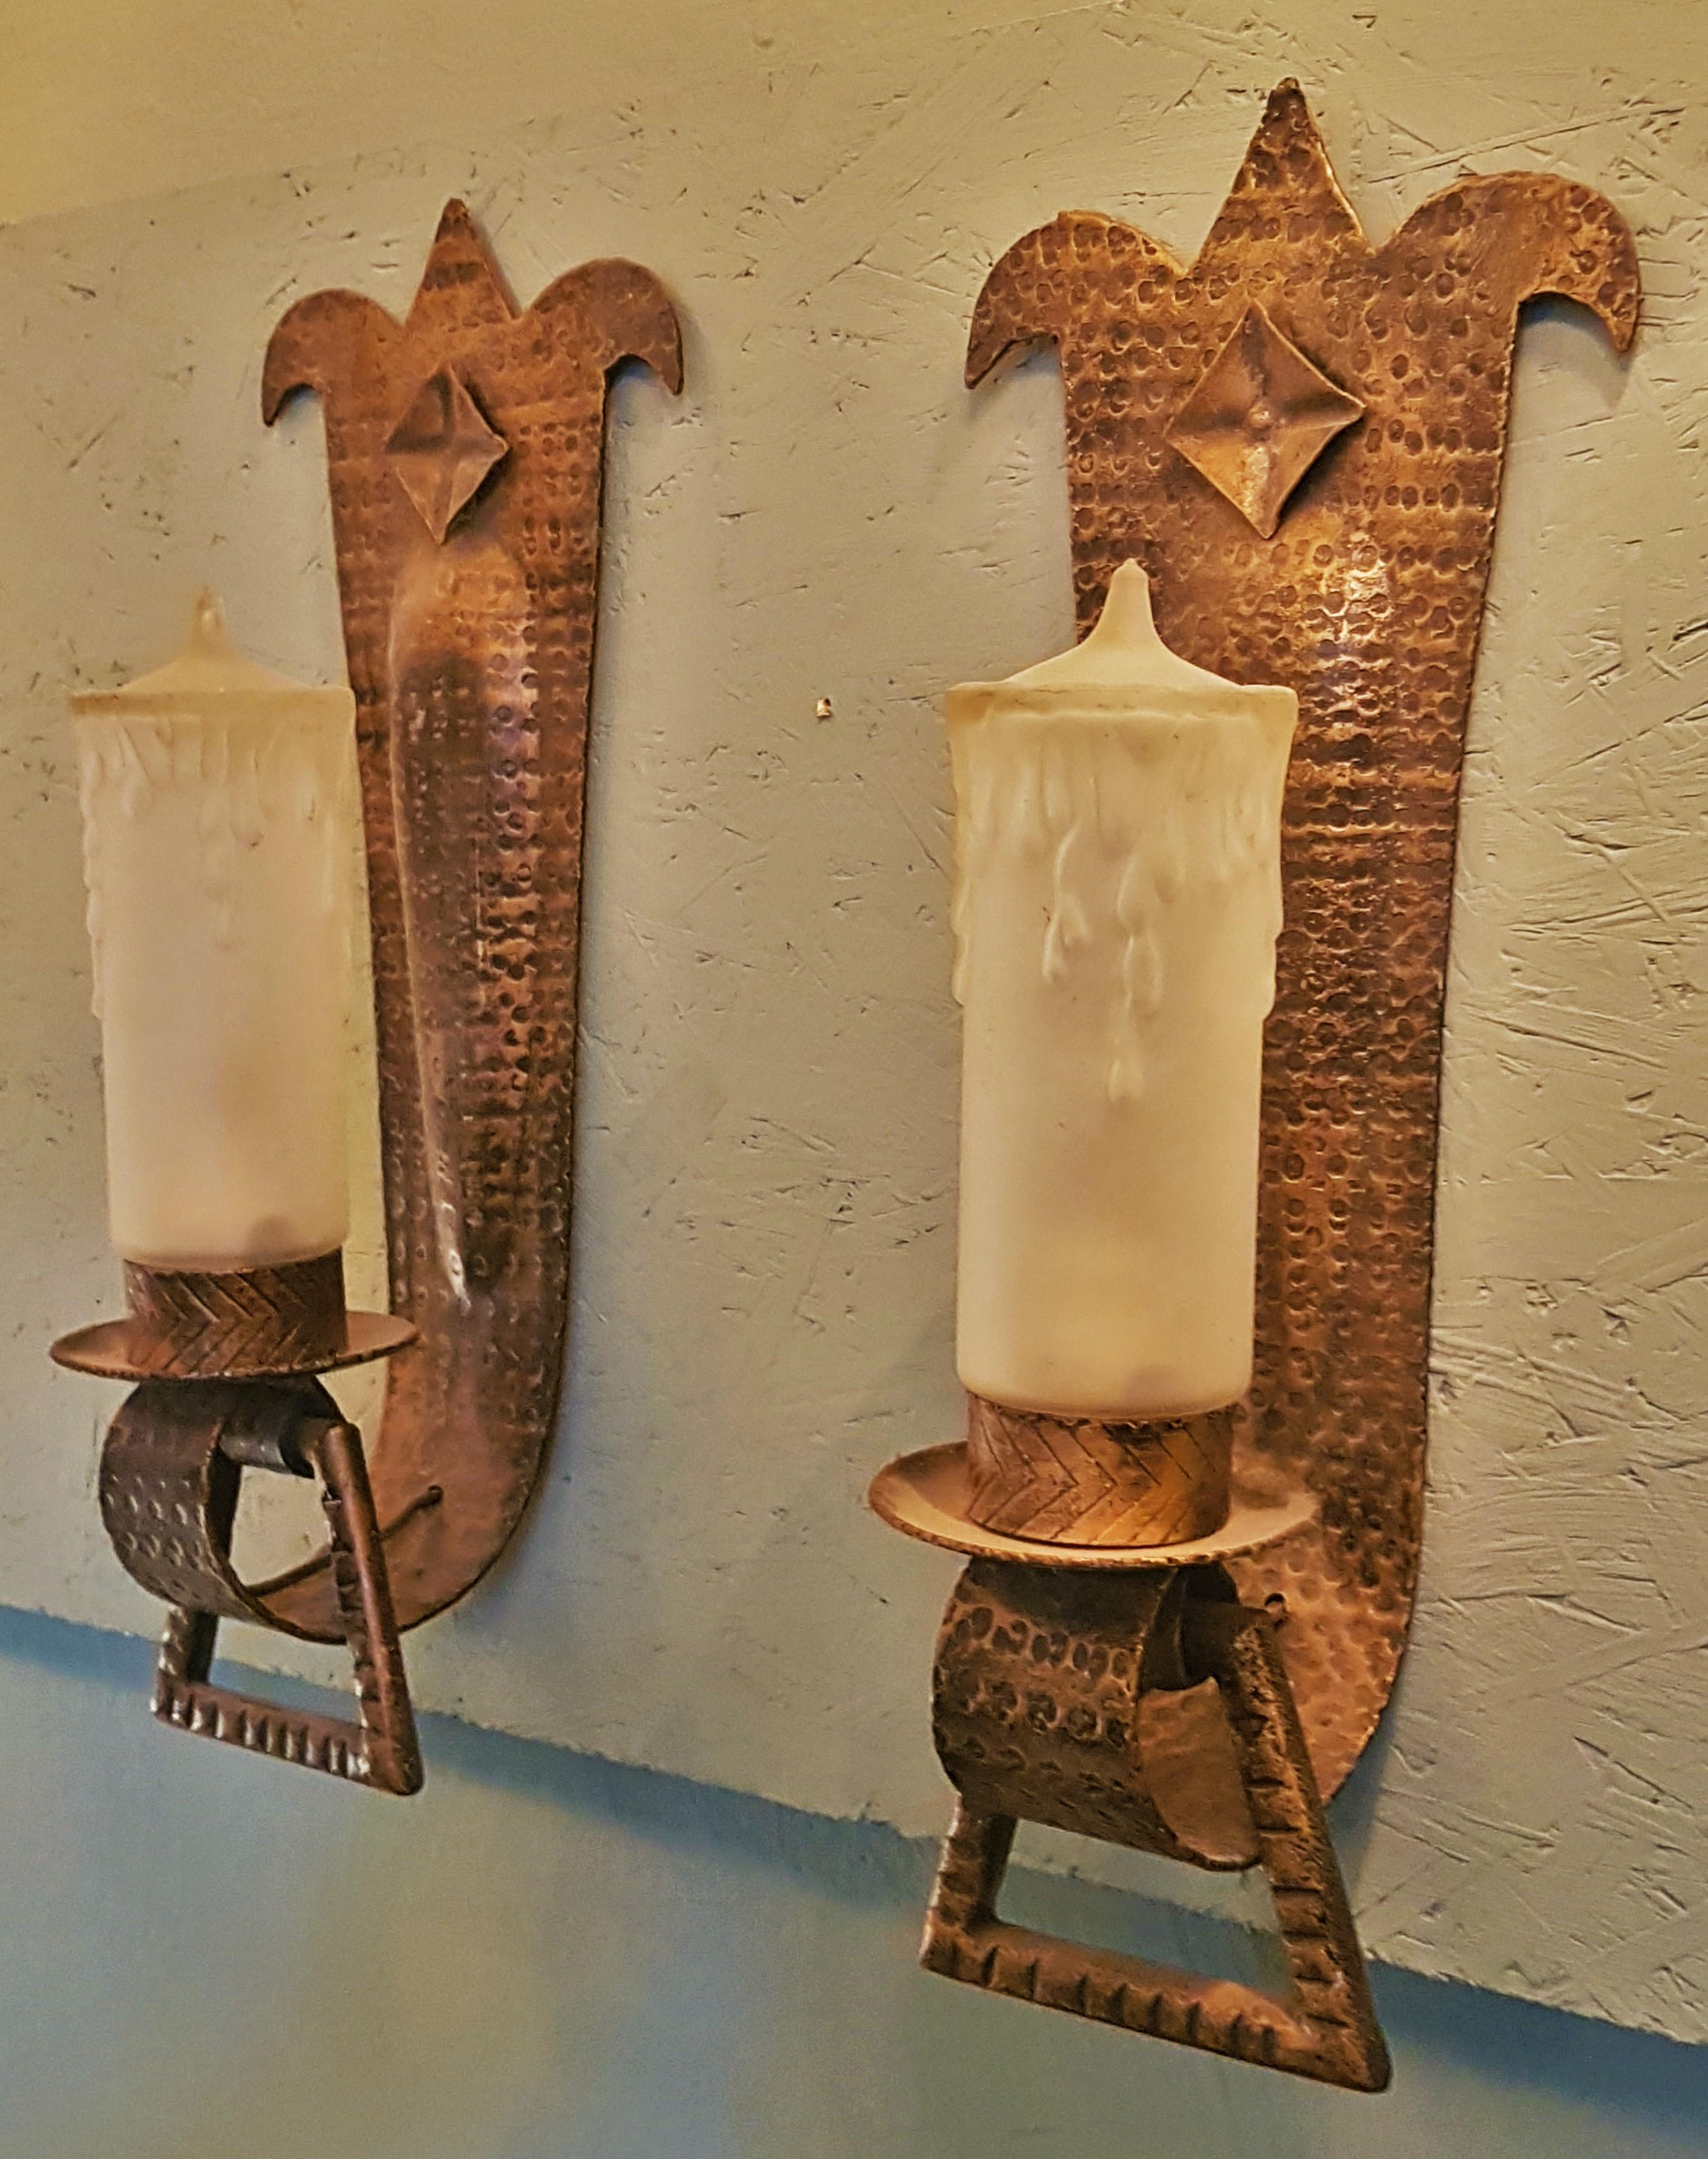 Pair of Art Deco Sconces, Glass and Gilded Metal, France, 1935 For Sale 1